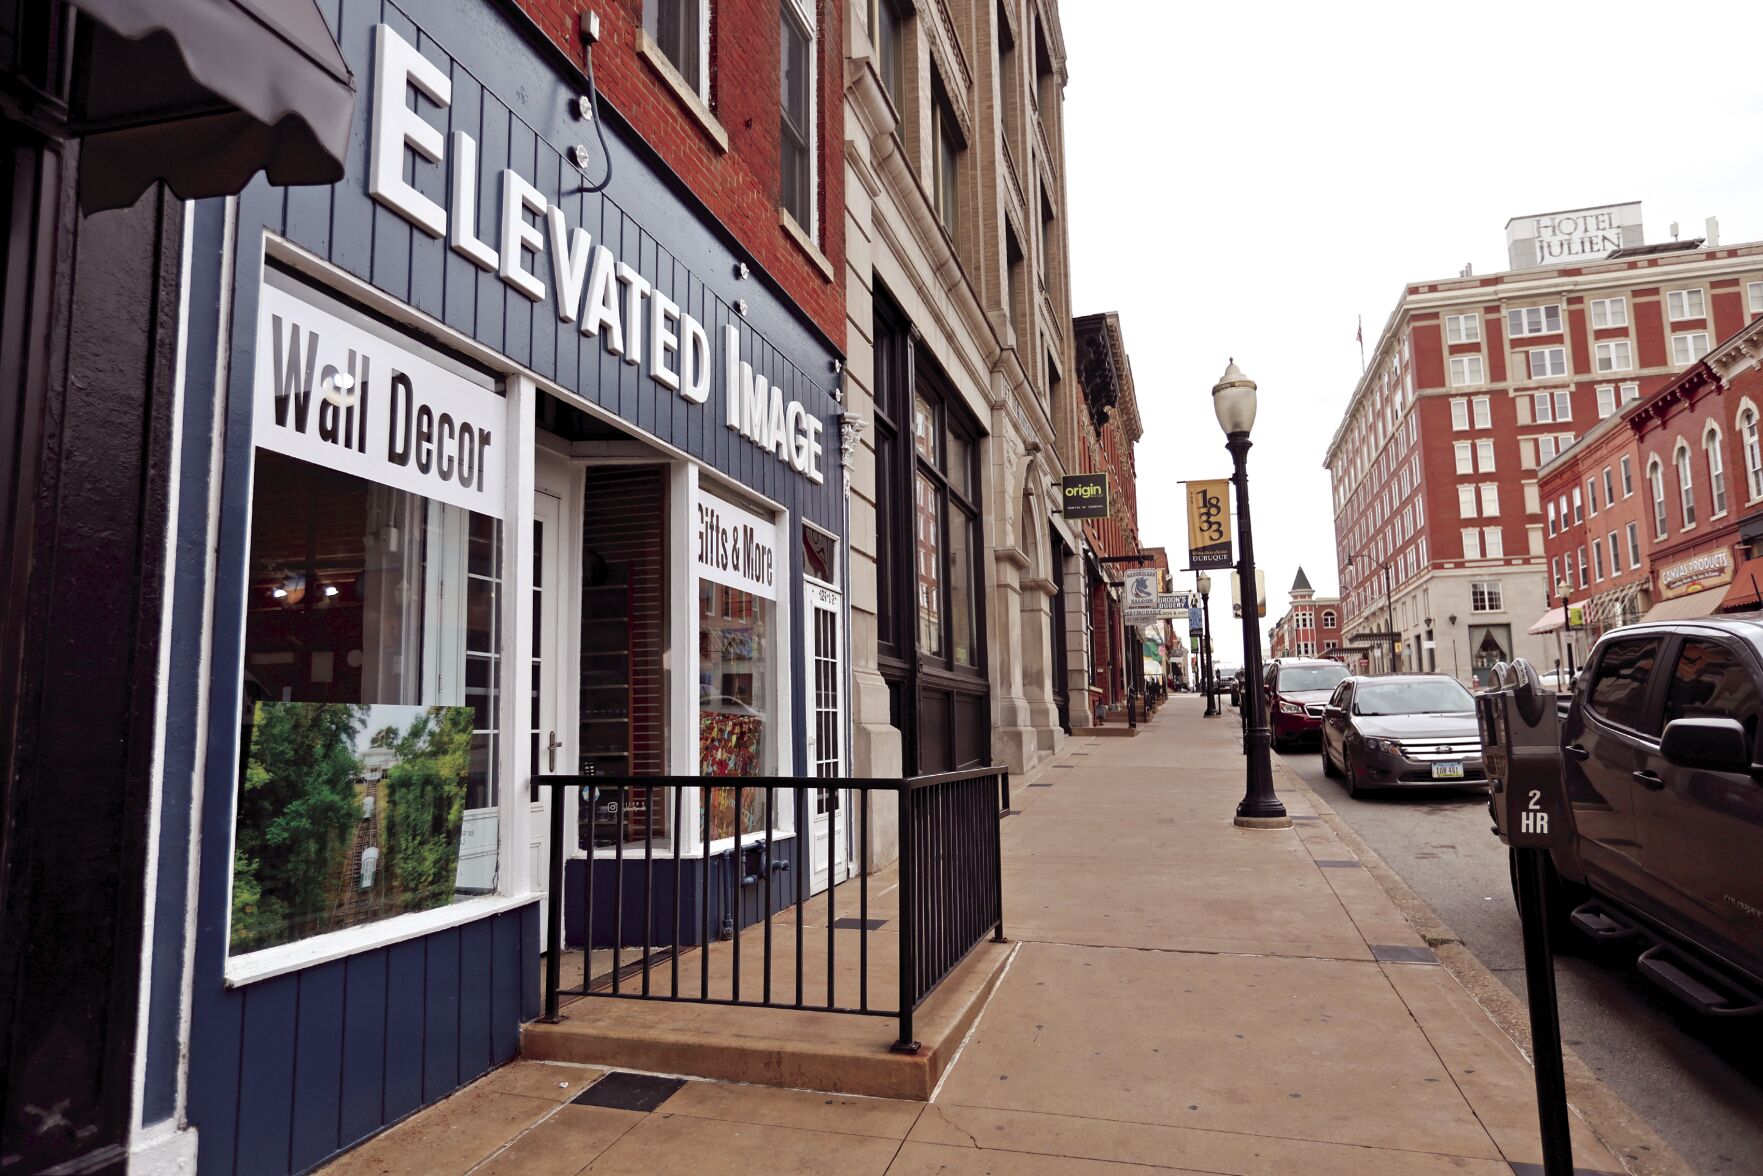 Elevated Images is located at 129 Main St. in Dubuque.    PHOTO CREDIT: JESSICA REILLY